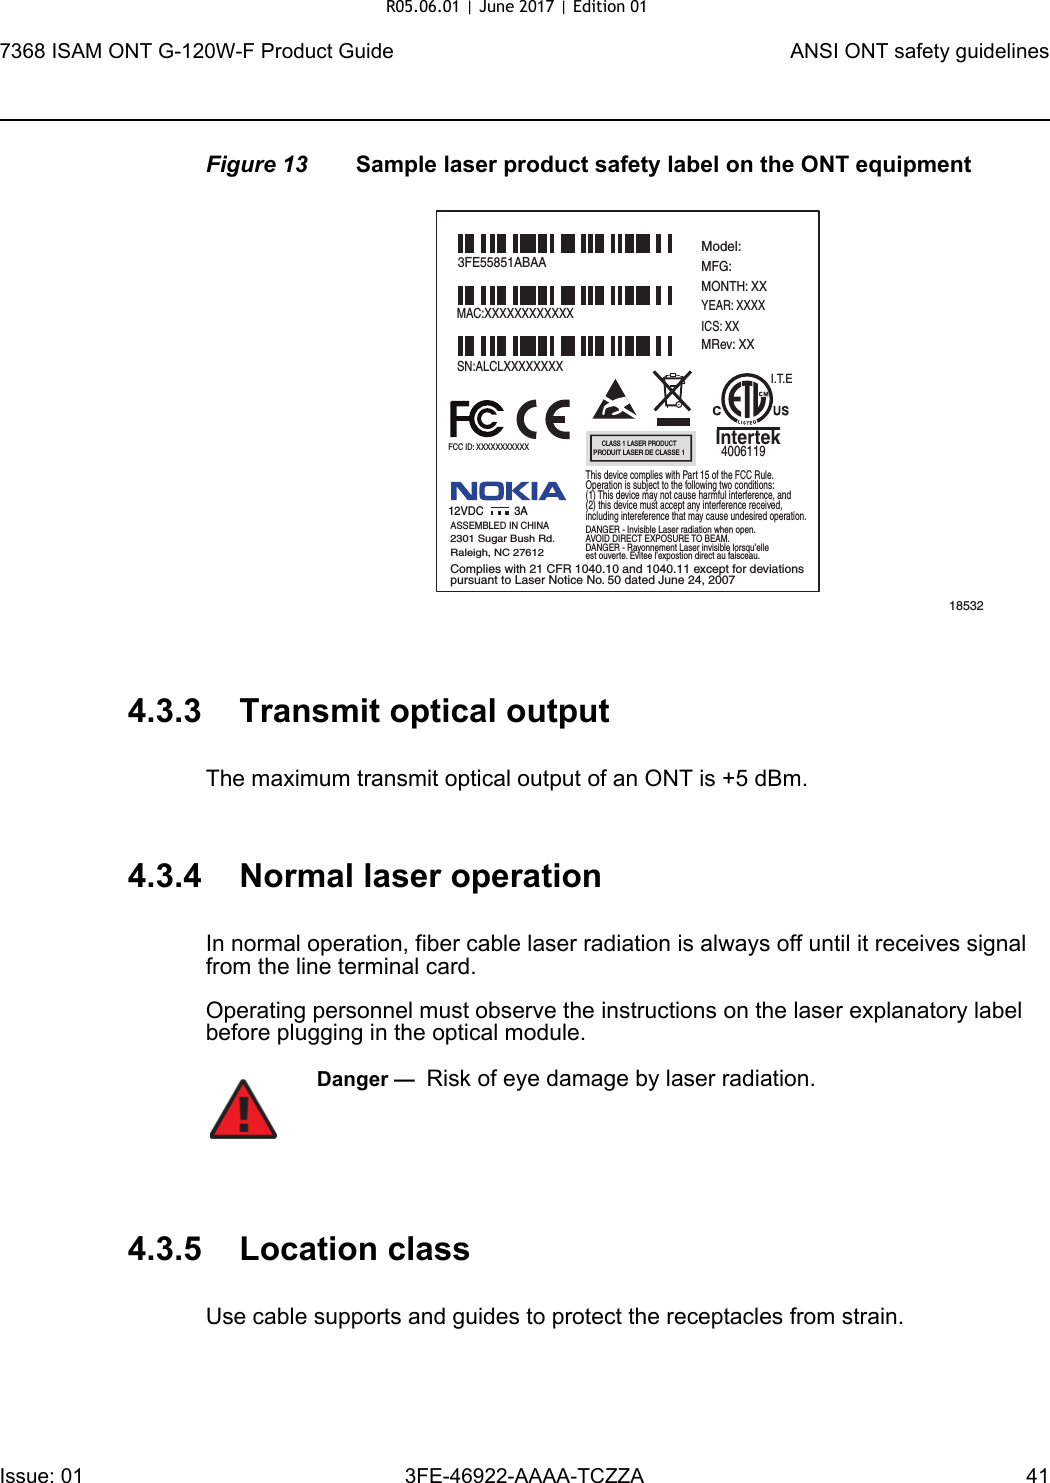 7368 ISAM ONT G-120W-F Product Guide ANSI ONT safety guidelinesIssue: 01 3FE-46922-AAAA-TCZZA 41 Figure 13 Sample laser product safety label on the ONT equipment4.3.3 Transmit optical outputThe maximum transmit optical output of an ONT is +5 dBm.4.3.4 Normal laser operationIn normal operation, fiber cable laser radiation is always off until it receives signal from the line terminal card.Operating personnel must observe the instructions on the laser explanatory label before plugging in the optical module.4.3.5 Location classUse cable supports and guides to protect the receptacles from strain.185323FE55851ABAAModel:MFG:MONTH: XXYEAR: XXXXICS: XXMRev: XX MAC:XXXXXXXXXXXXSN:ALCLXXXXXXXXFCC ID: XXXXXXXXXXXThis device complies with Part 15 of the FCC Rule.Operation is subject to the following two conditions:(1) This device may not cause harmful interference, and(2) this device must accept any interference received,including intereference that may cause undesired operation. ASSEMBLED IN CHINA2301 Sugar Bush Rd.Raleigh, NC 27612DANGER - Invisible Laser radiation when open.AVOID DIRECT EXPOSURE TO BEAM.DANGER - Rayonnement Laser invisible lorsqu’elleest ouverte. Evitee l’expostion direct au faisceau.Complies with 21 CFR 1040.10 and 1040.11 except for deviationspursuant to Laser Notice No. 50 dated June 24, 200712VDC 3AI.T.EIntertek4006119CLASS 1 LASER PRODUCTPRODUIT LASER DE CLASSE 1Danger —  Risk of eye damage by laser radiation.R05.06.01 | June 2017 | Edition 01 